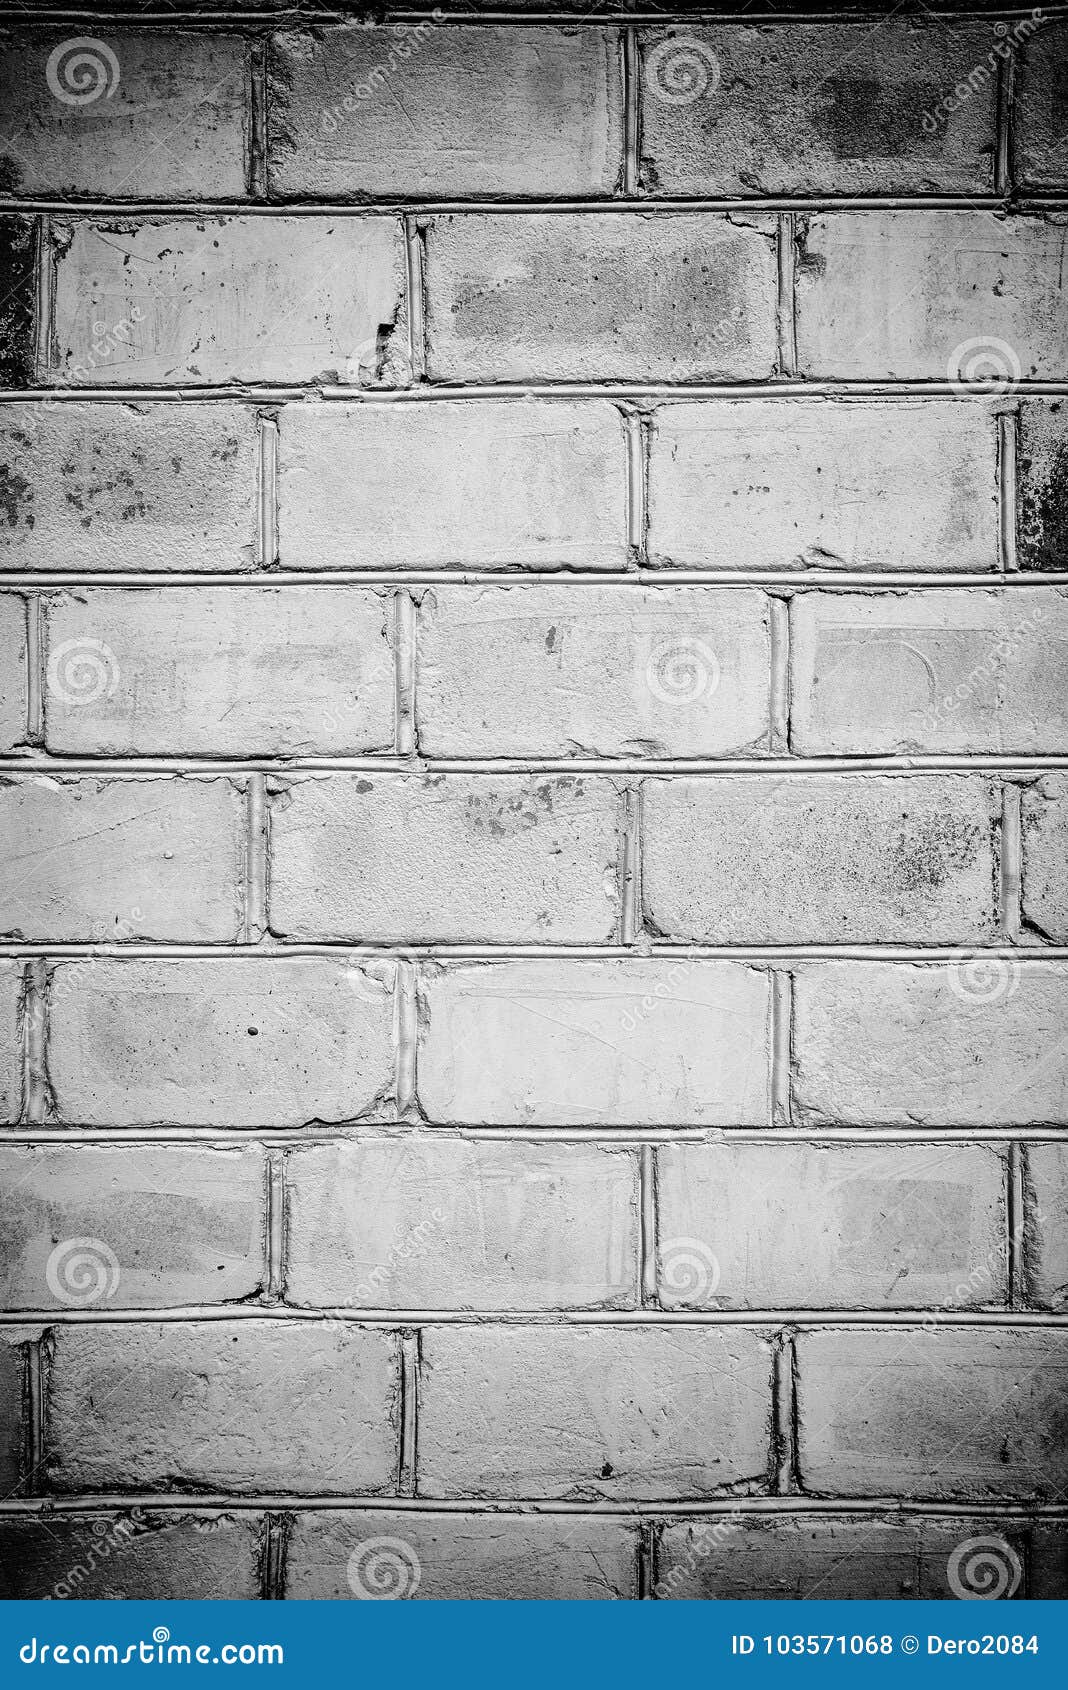 Black And White Effect Of Brick Wall For Background,, 55% OFF